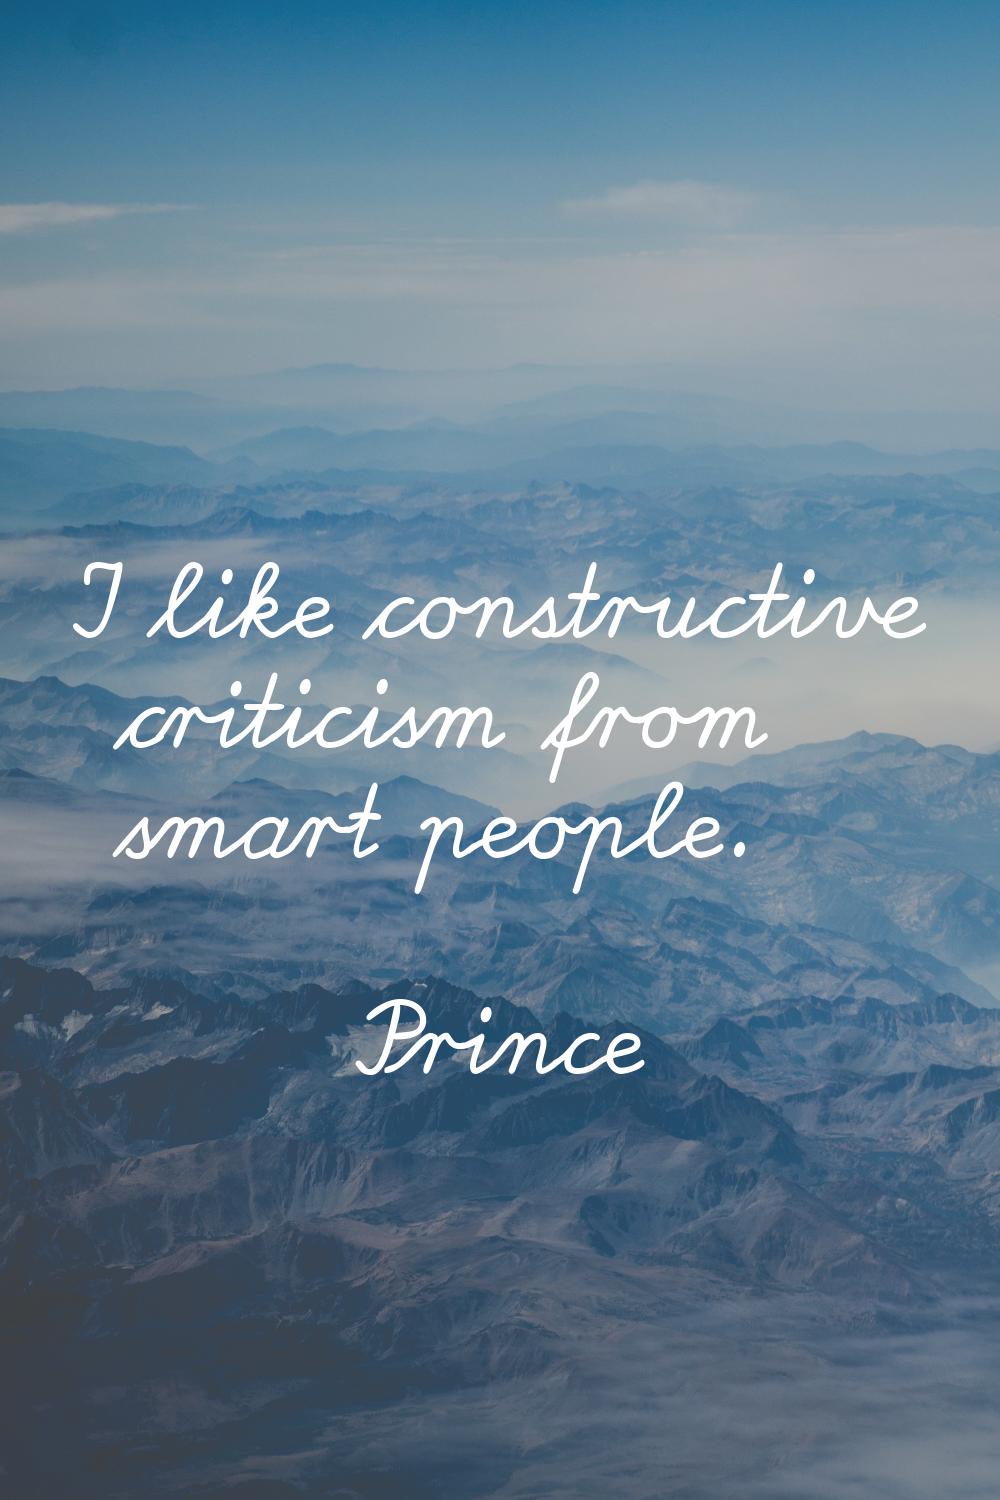 I like constructive criticism from smart people.